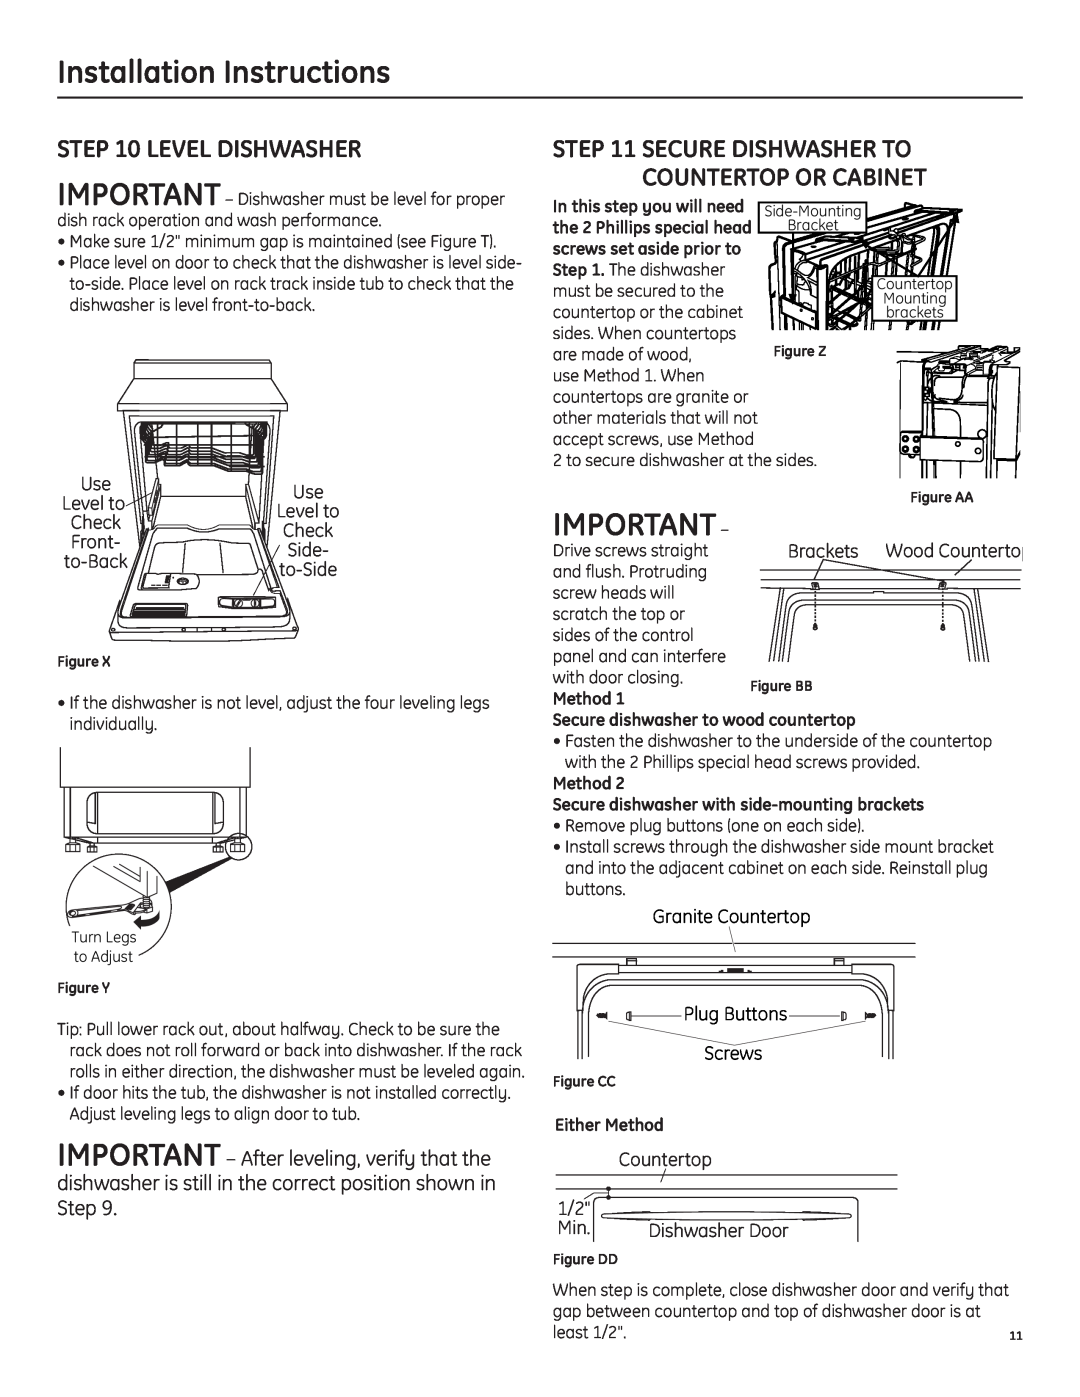 GE ZBD1870NSS Level Dishwasher, Installation Instructions, Secure Dishwasher To Countertop Or Cabinet, Either Method 